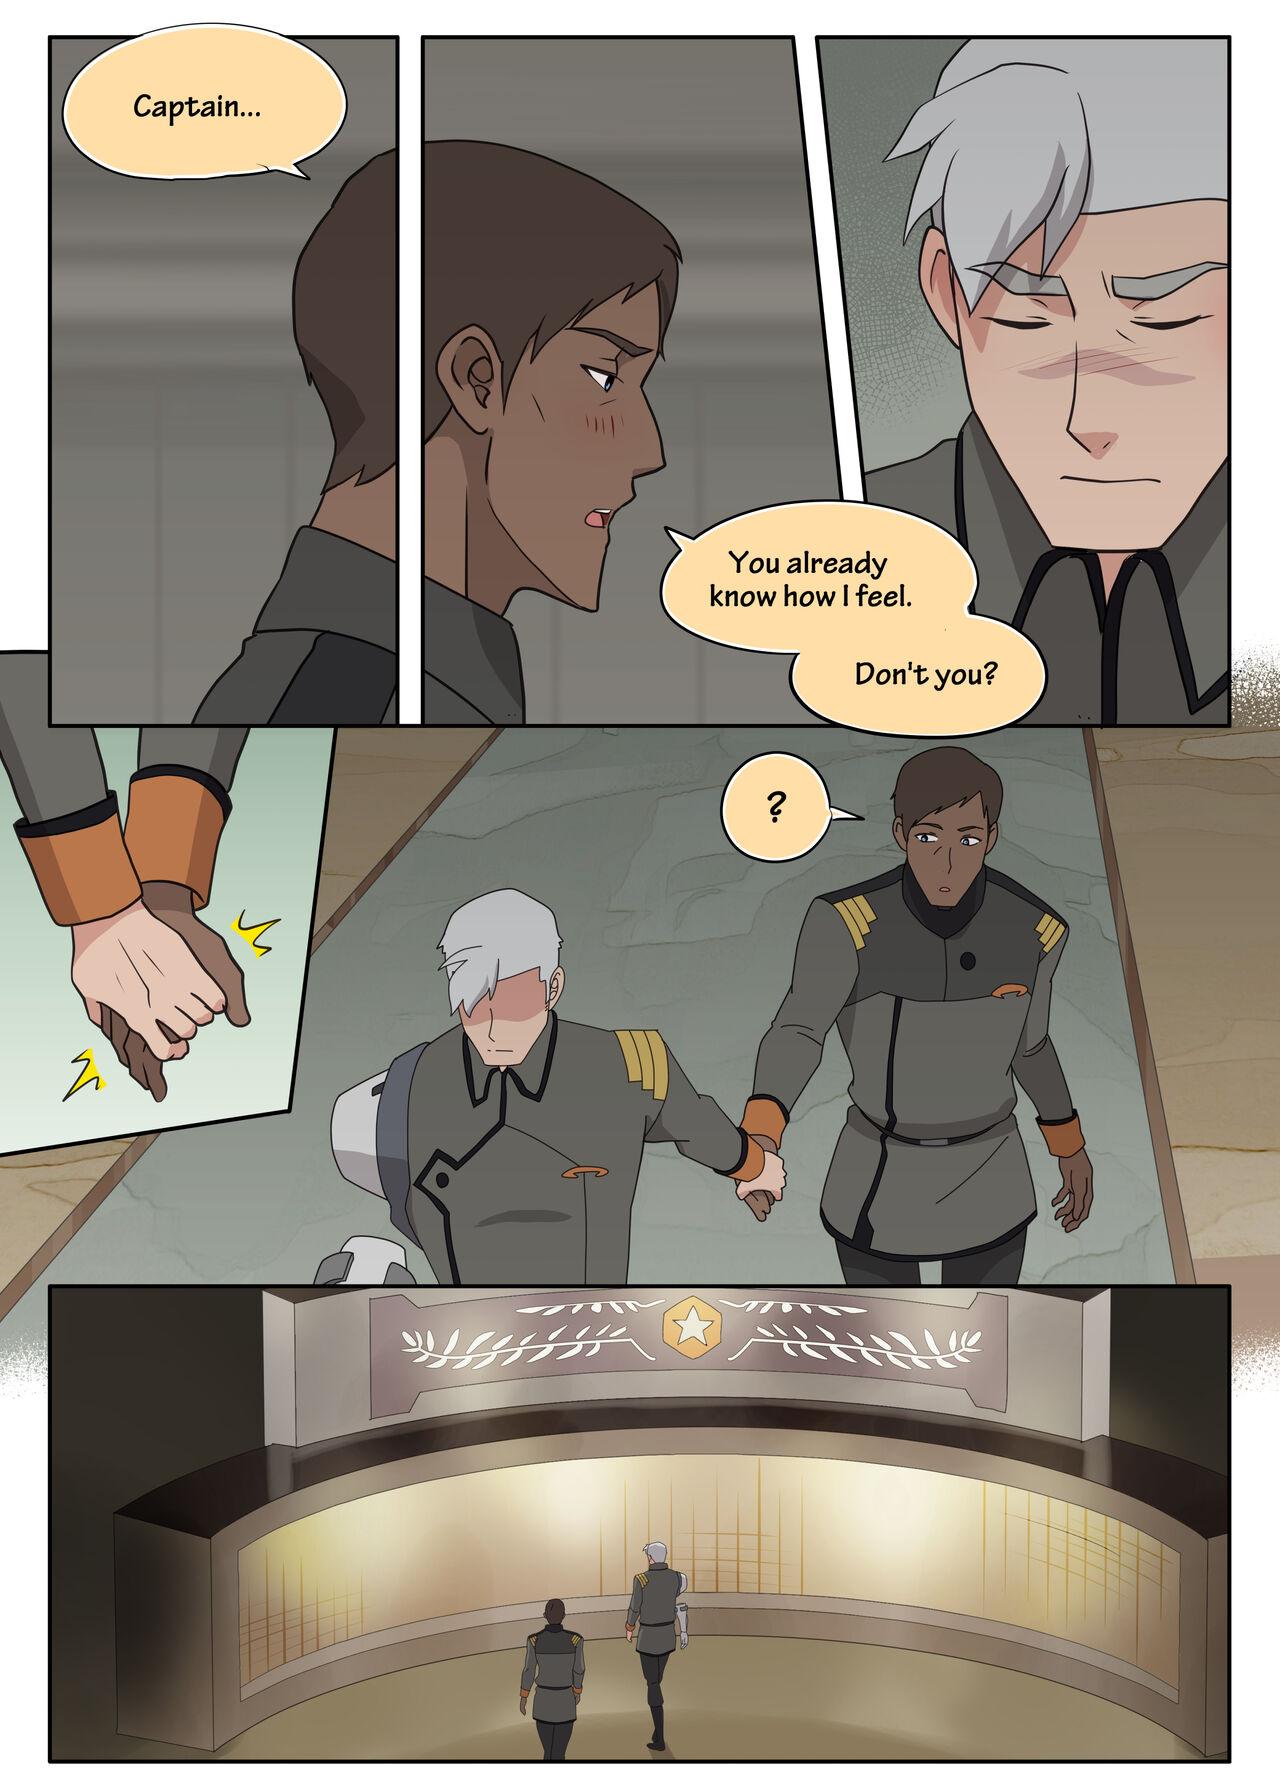 Public Nudity Captain, You’re so CUTE! - Voltron American - Page 11